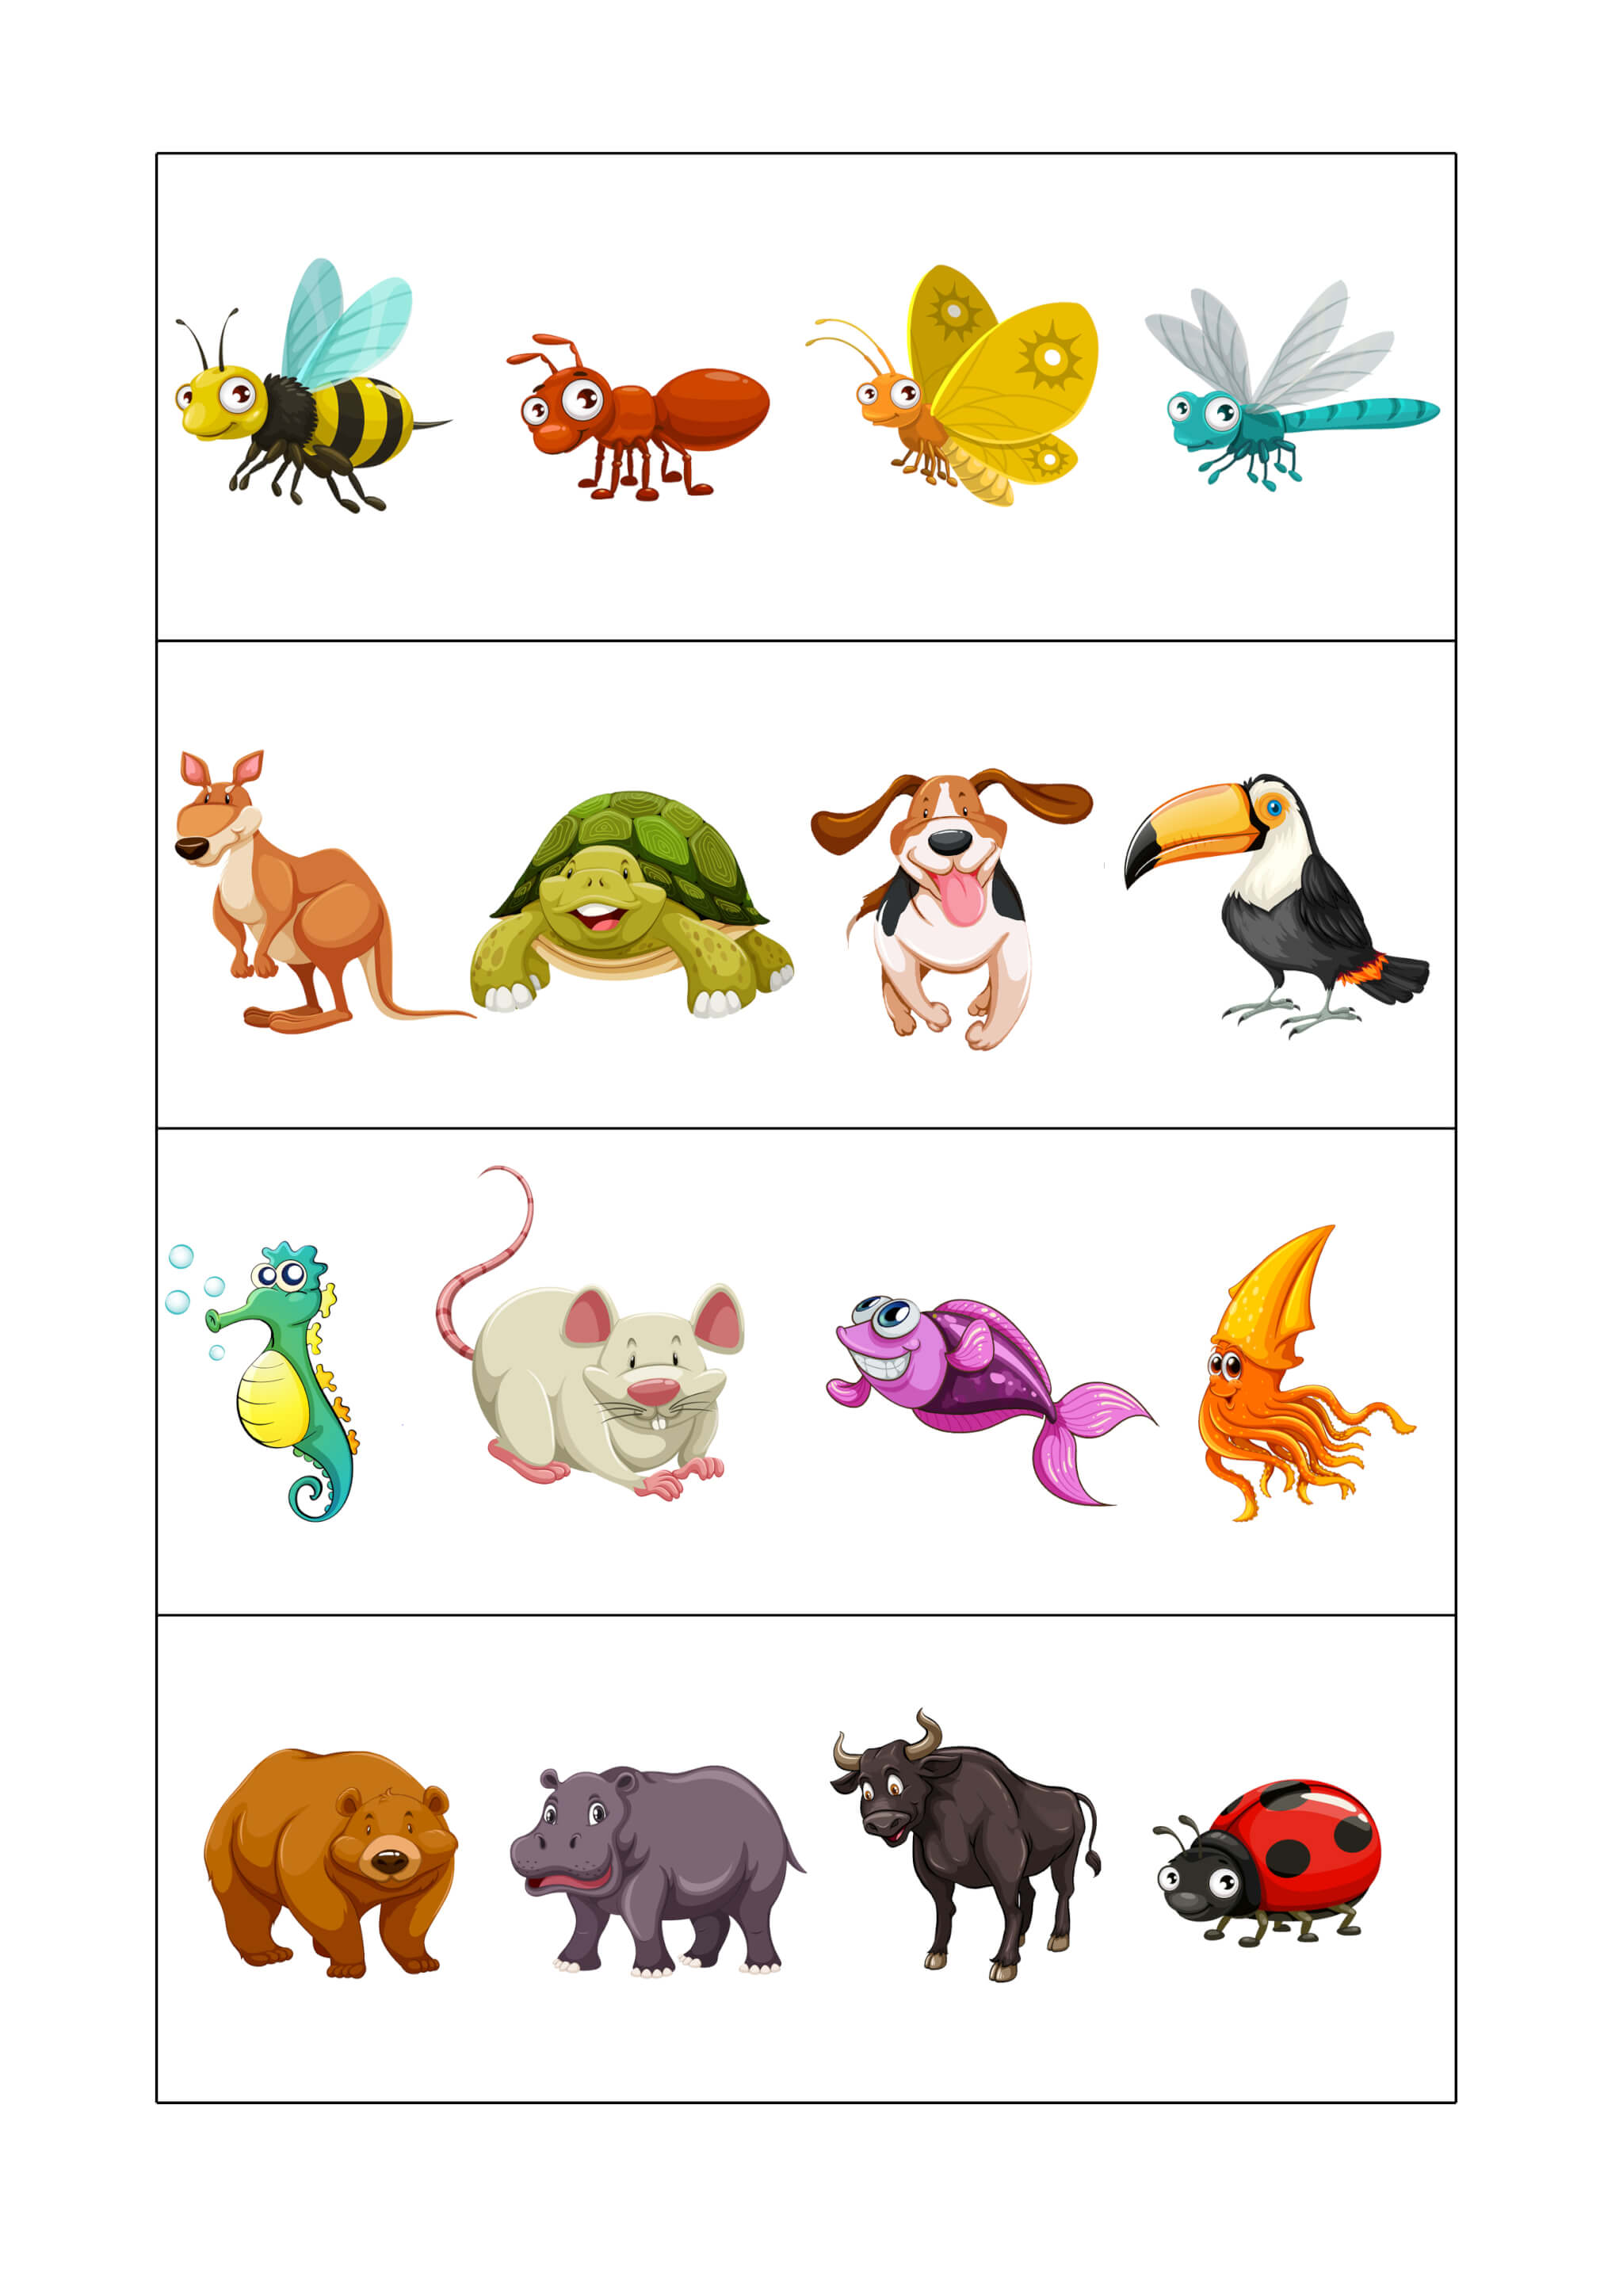 Worksheet for Preschoolers One is Out - Image 2